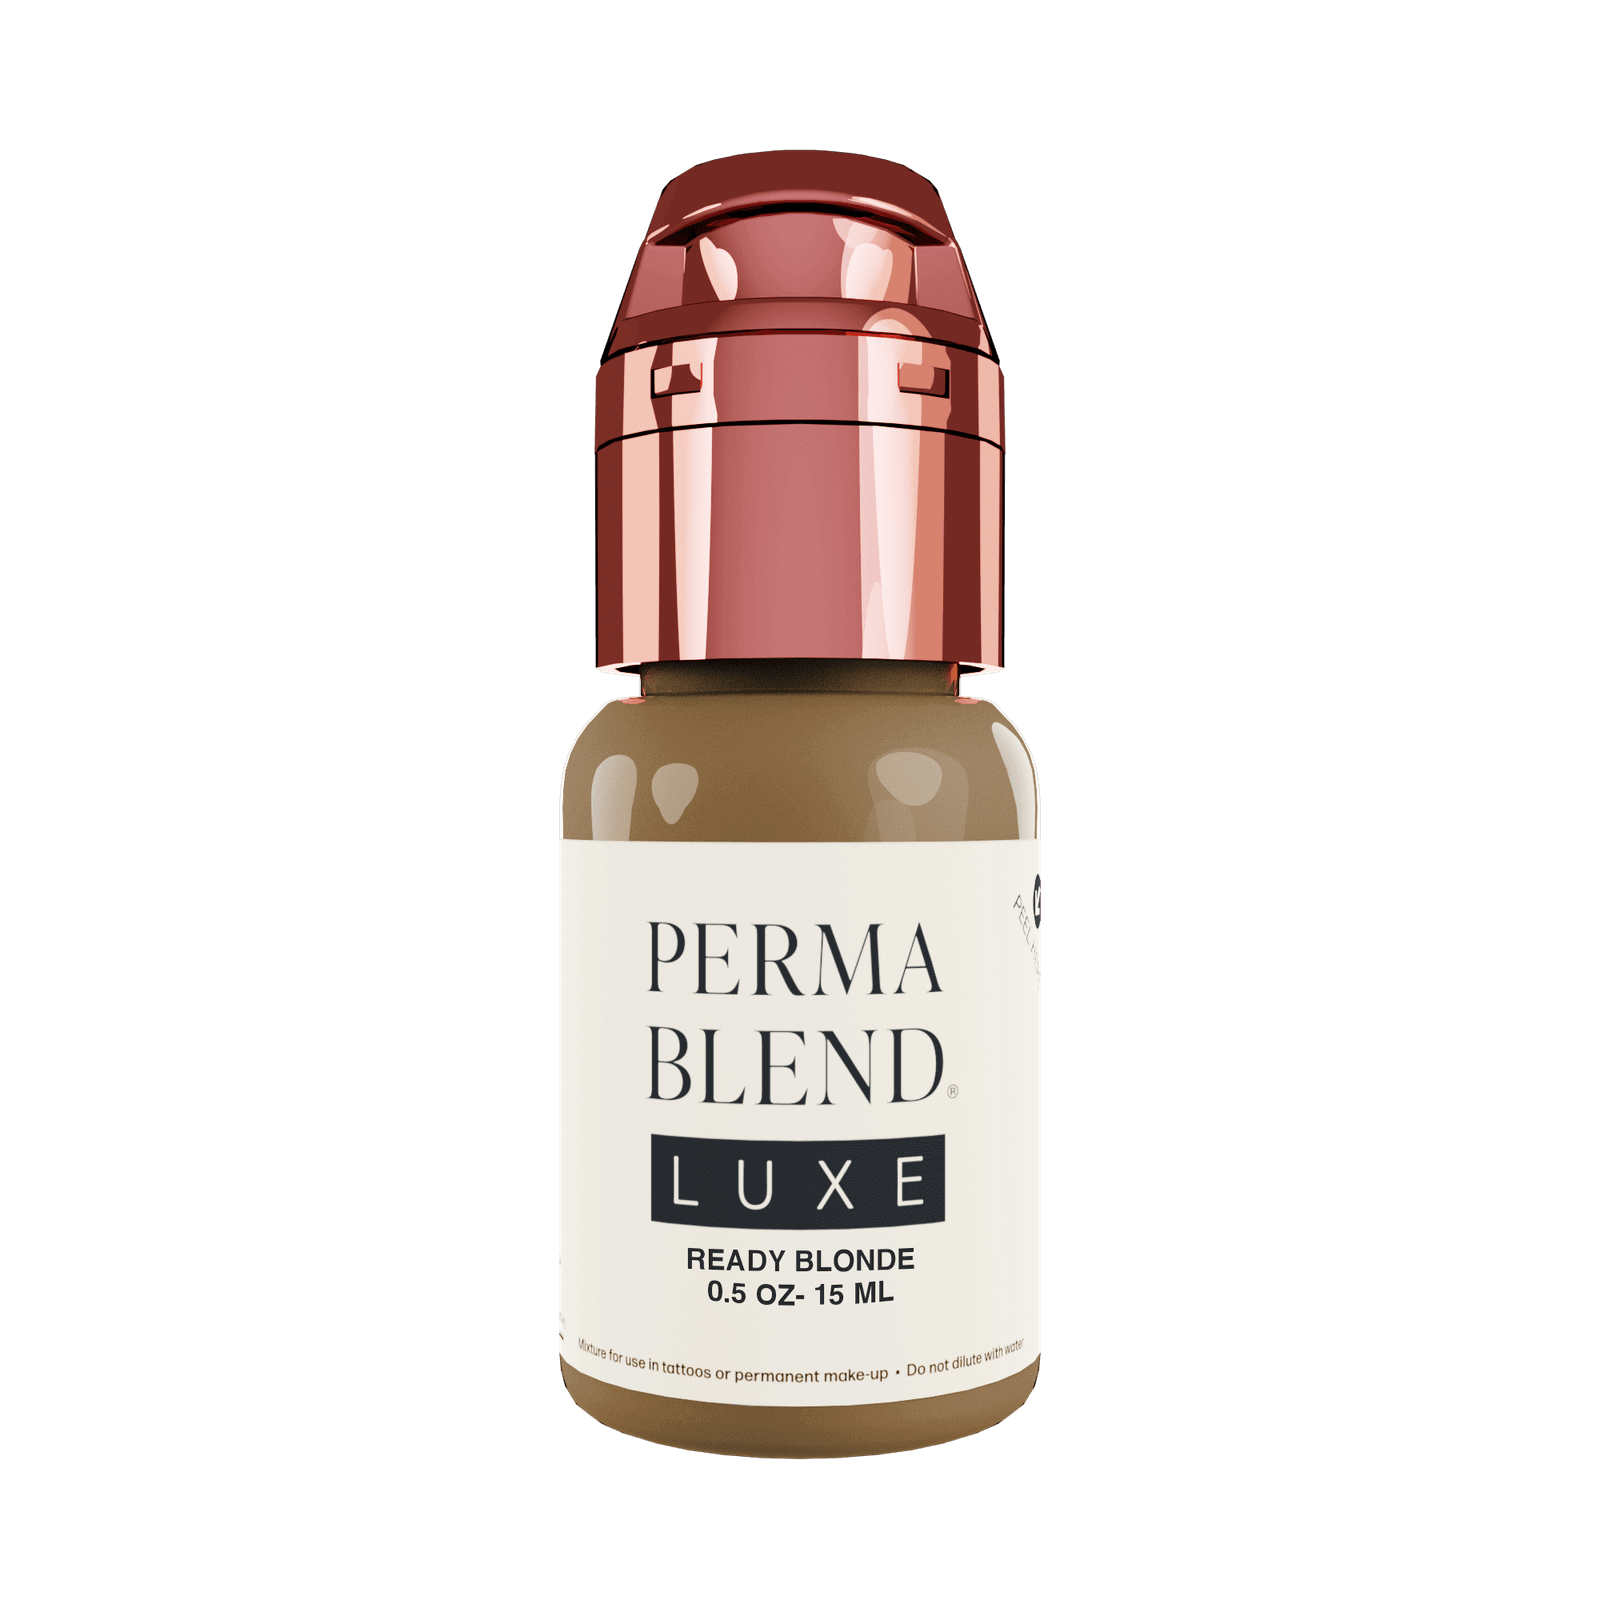 Perma Blend Luxe Ready Blonde